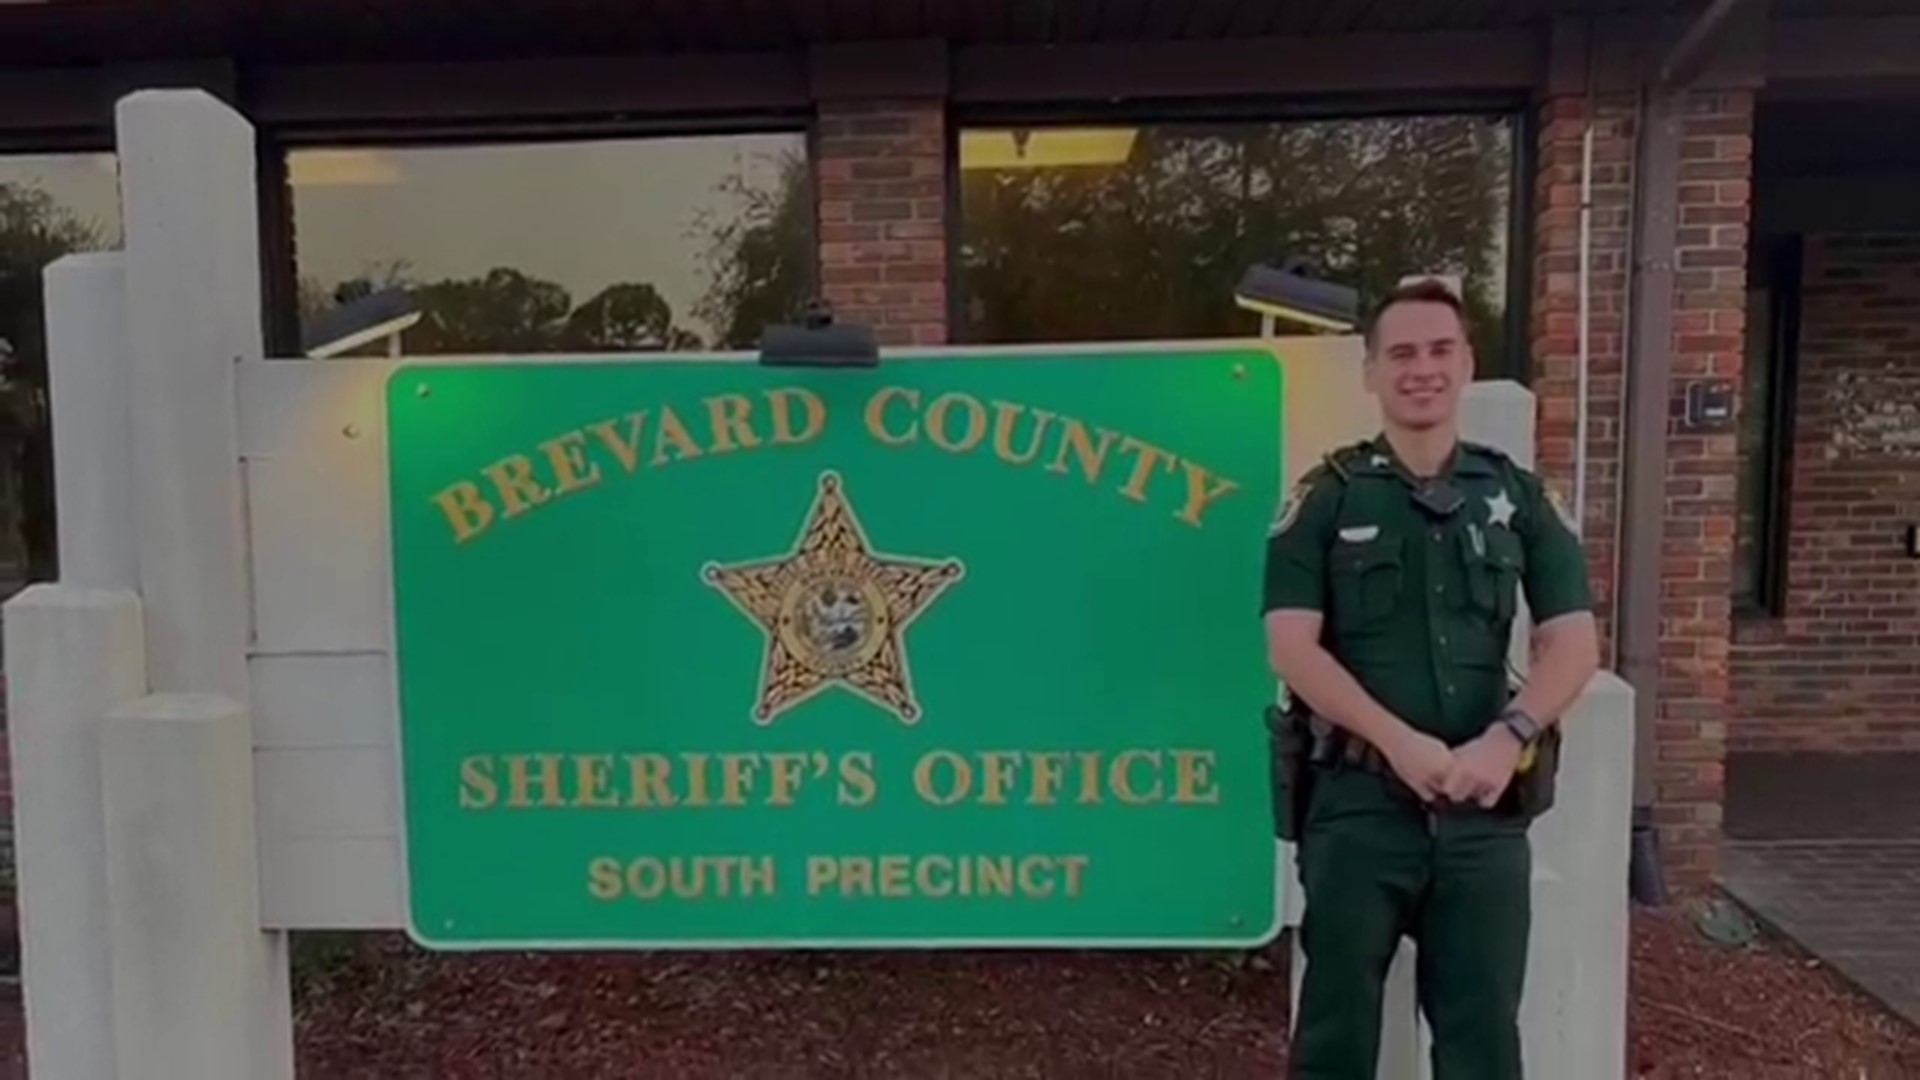 The Brevard County Sheriff's Office announced that Deputy Austin Walsh was accidentally shot and killed by his roommate, a fellow deputy.